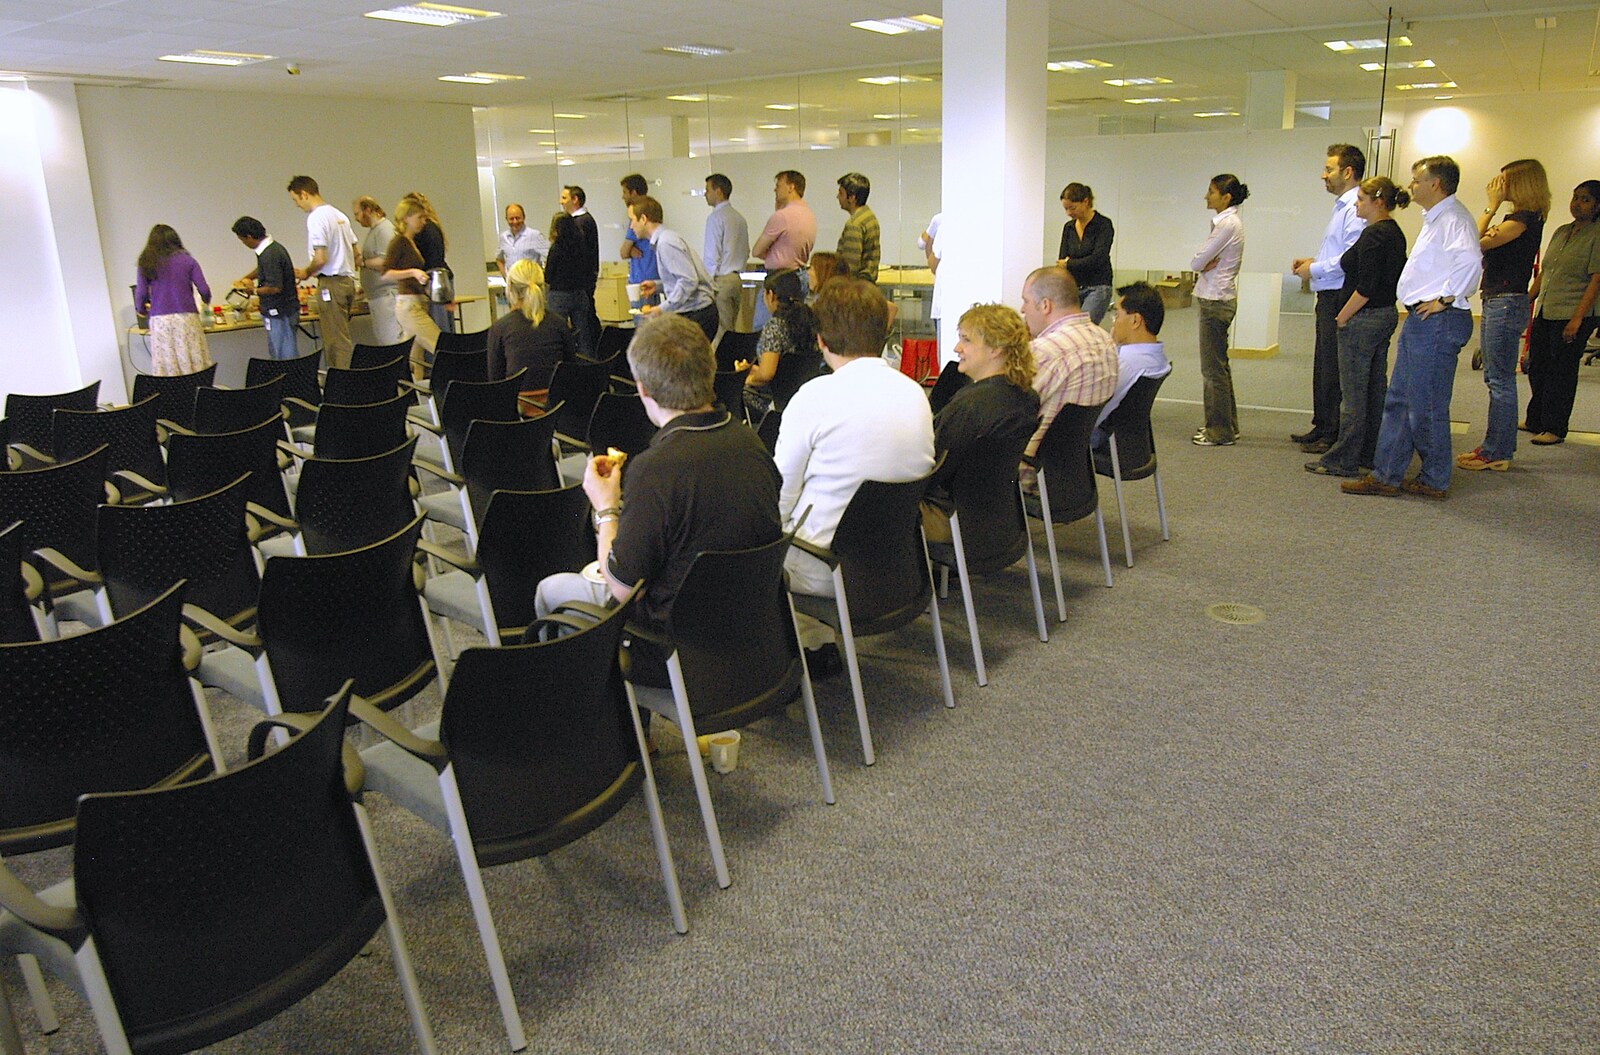 There's a queue for food in the new building from Qualcomm Moves Offices, Milton Road, Cambridge - 26th July 2006